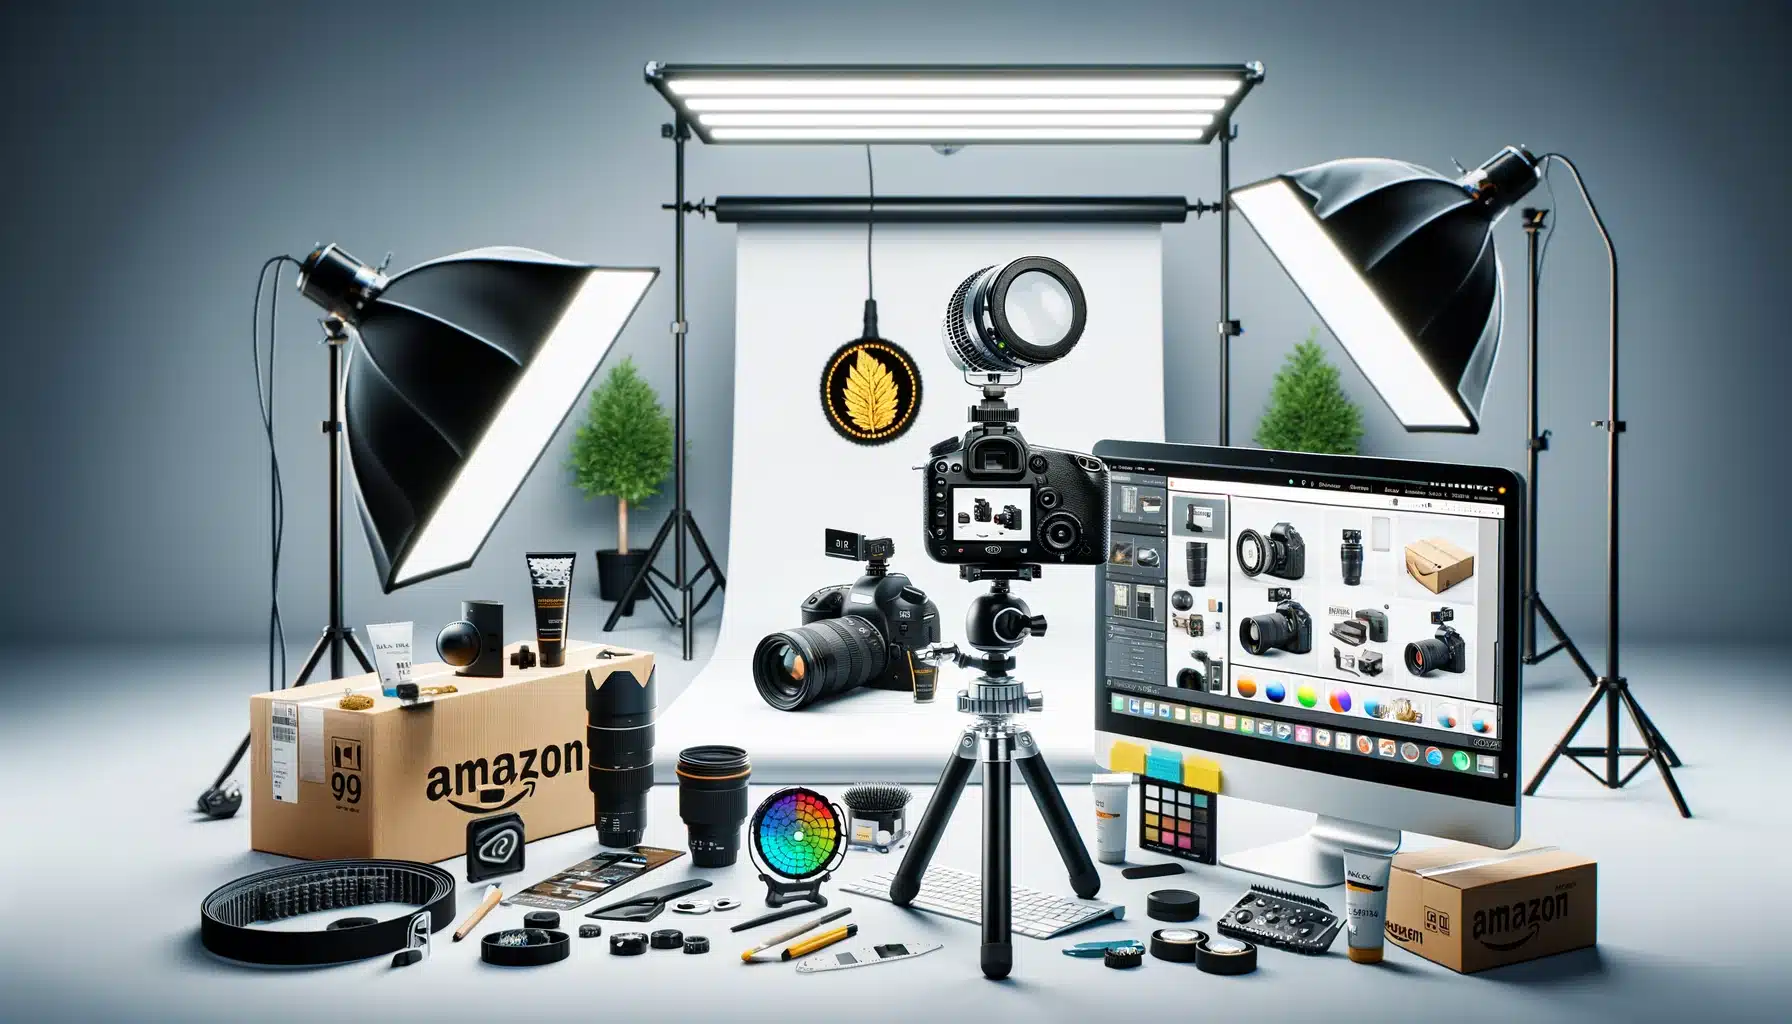 Amazon product photography studio with camera on tripod, softbox lighting, and editing software